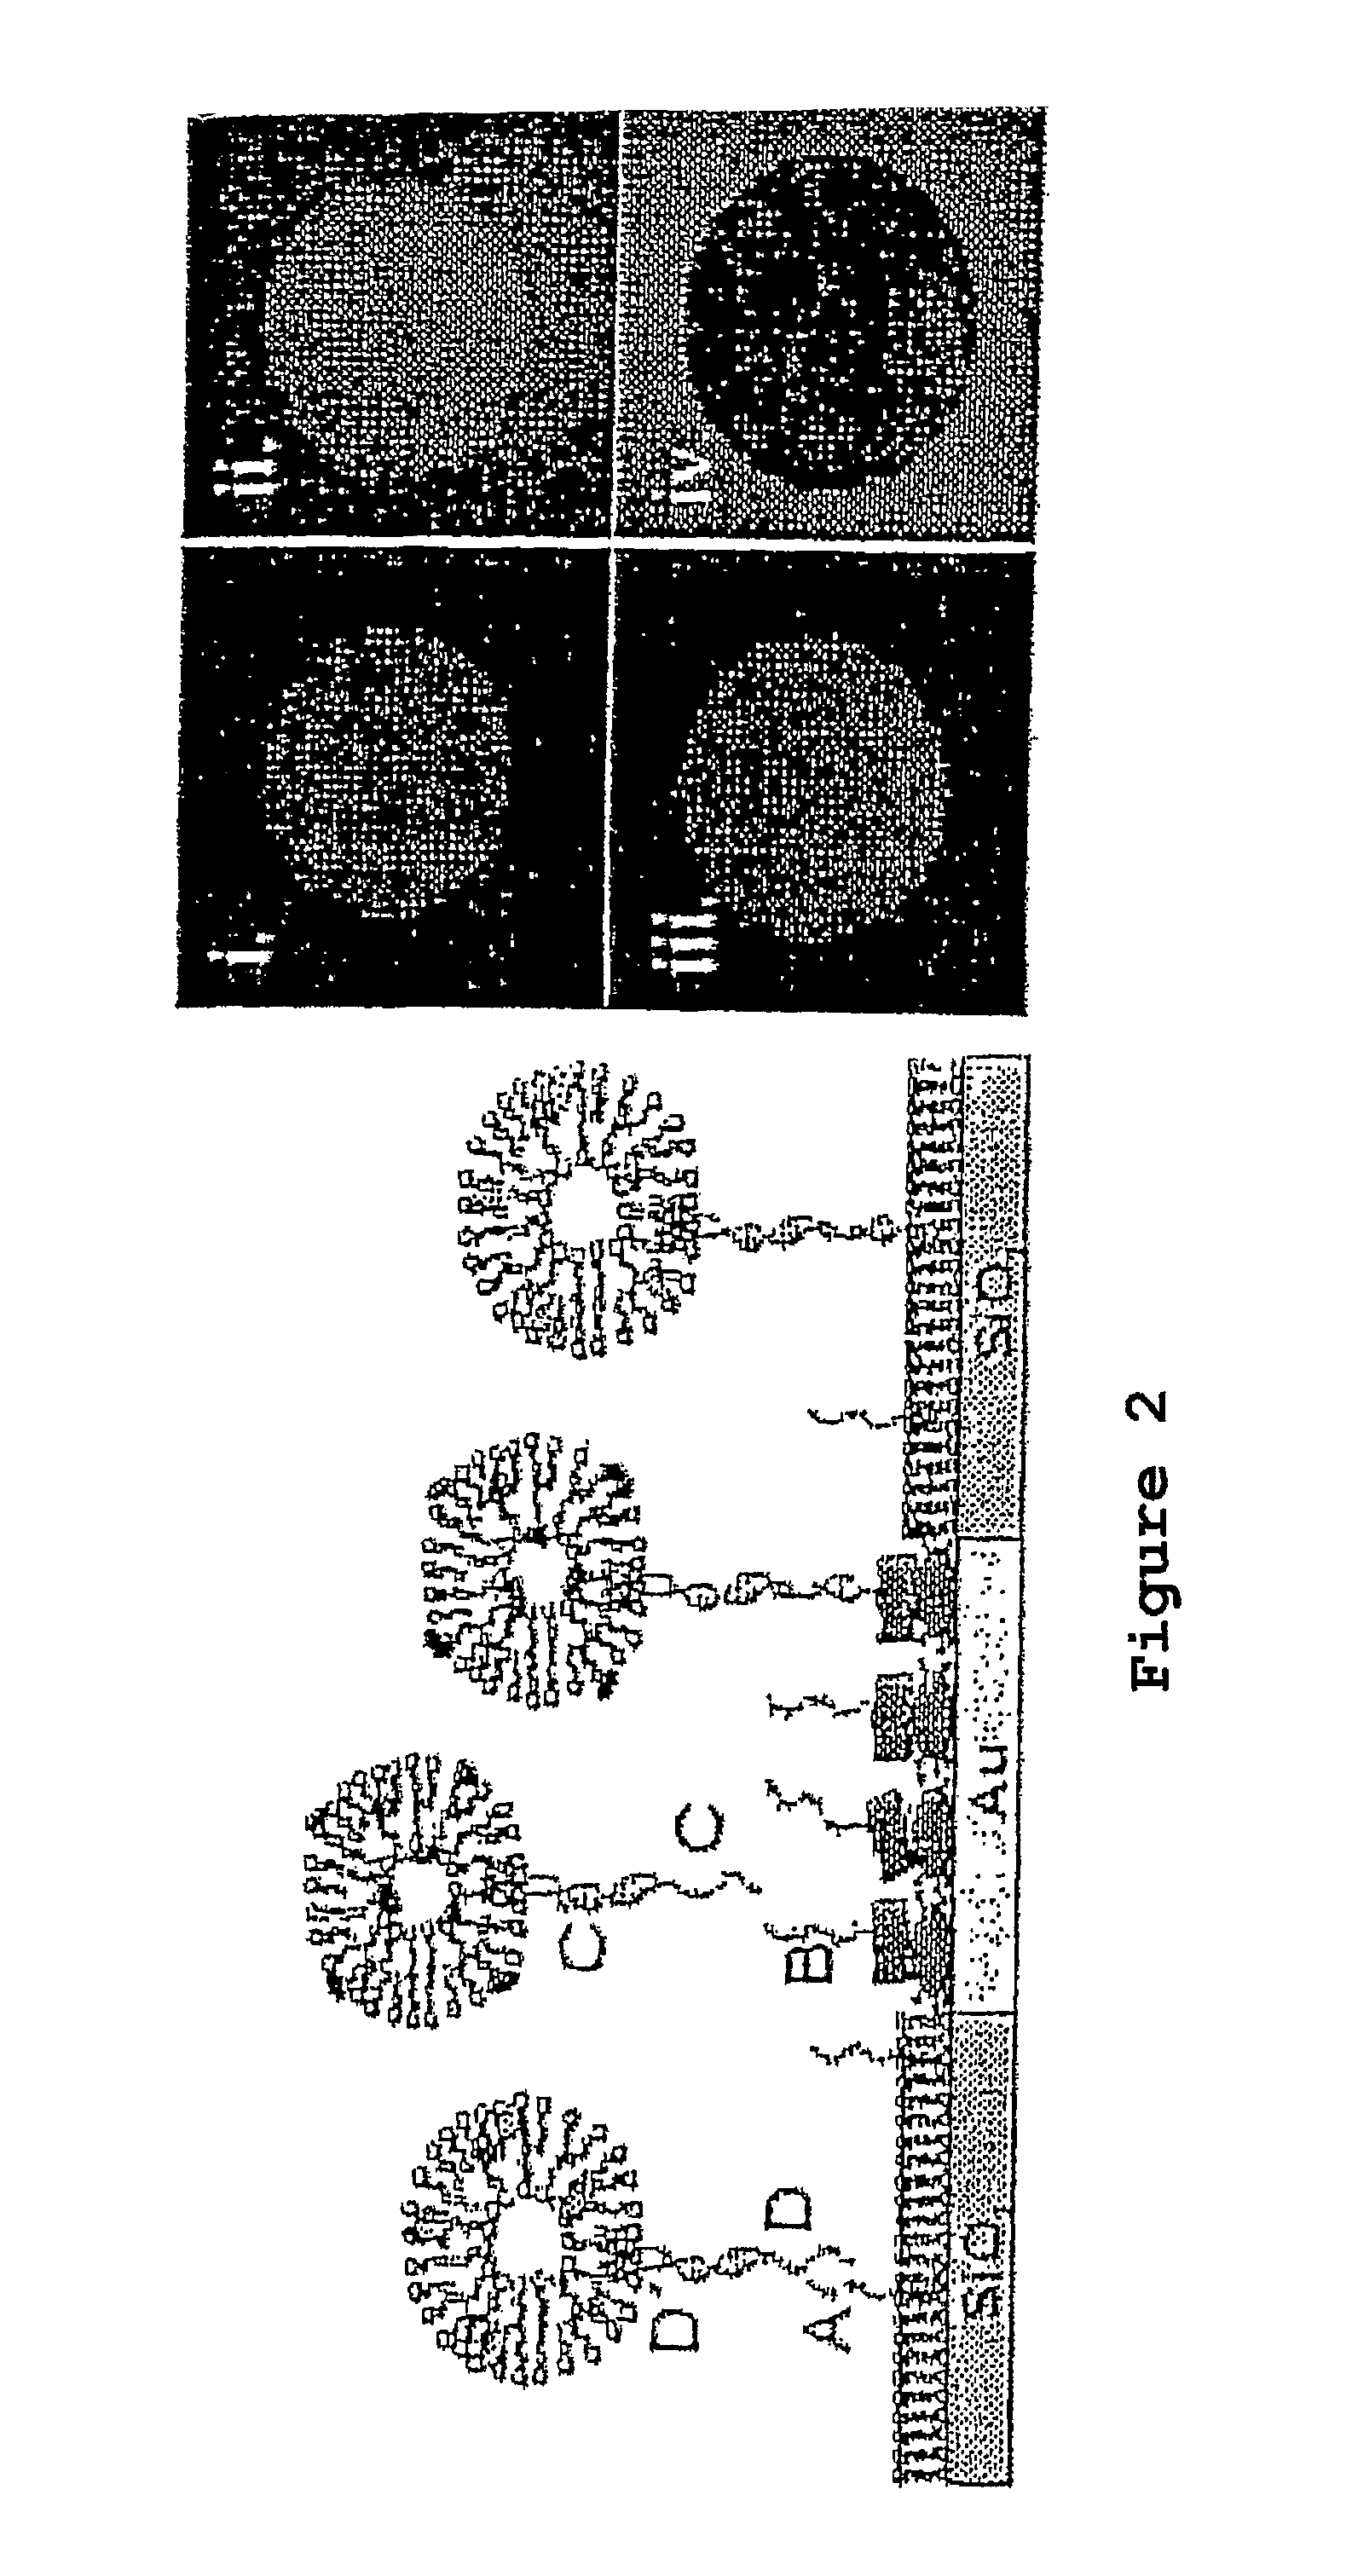 Oligonucleotides related to lipid membrane attachments